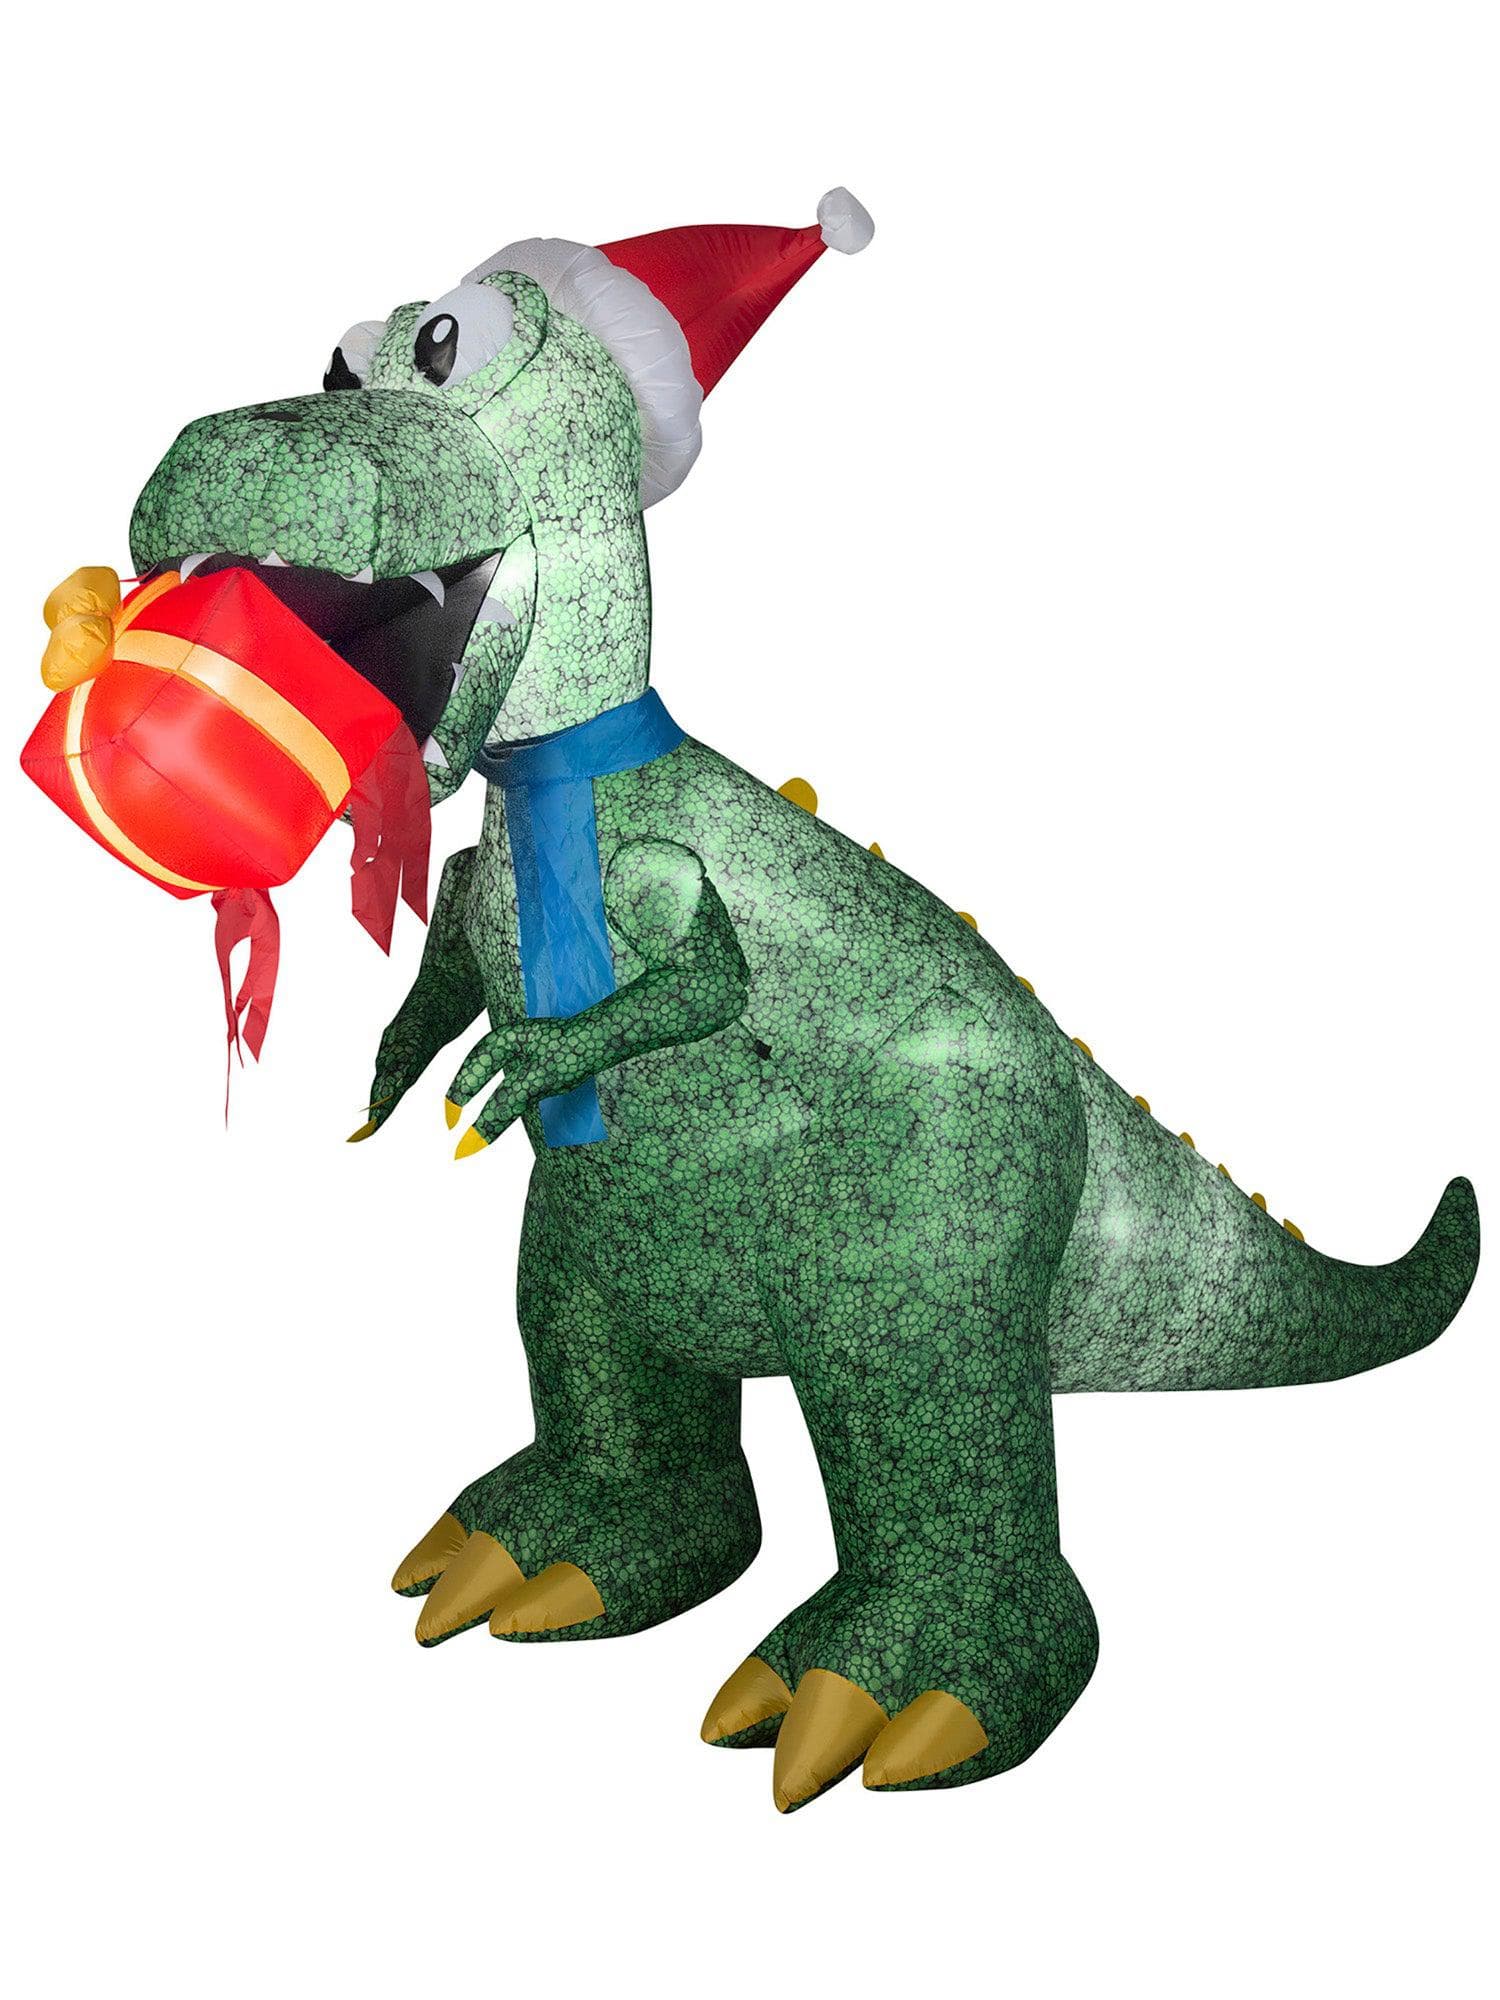 7 Foot T-Rex Light Up Christmas Inflatable Lawn Decor - costumes.com